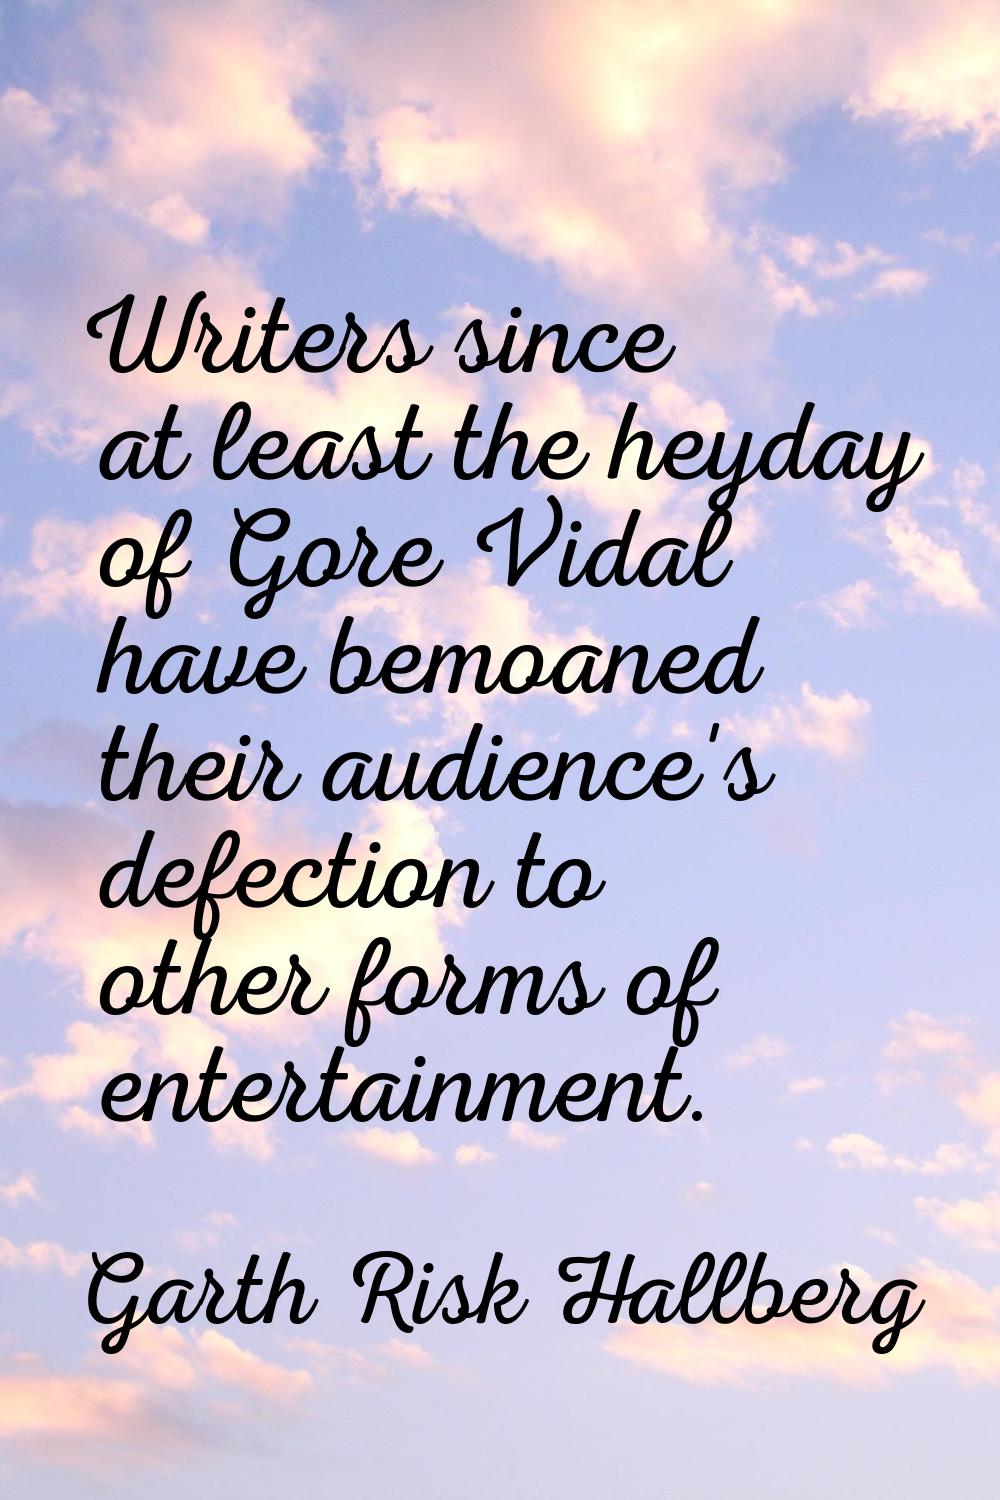 Writers since at least the heyday of Gore Vidal have bemoaned their audience's defection to other f